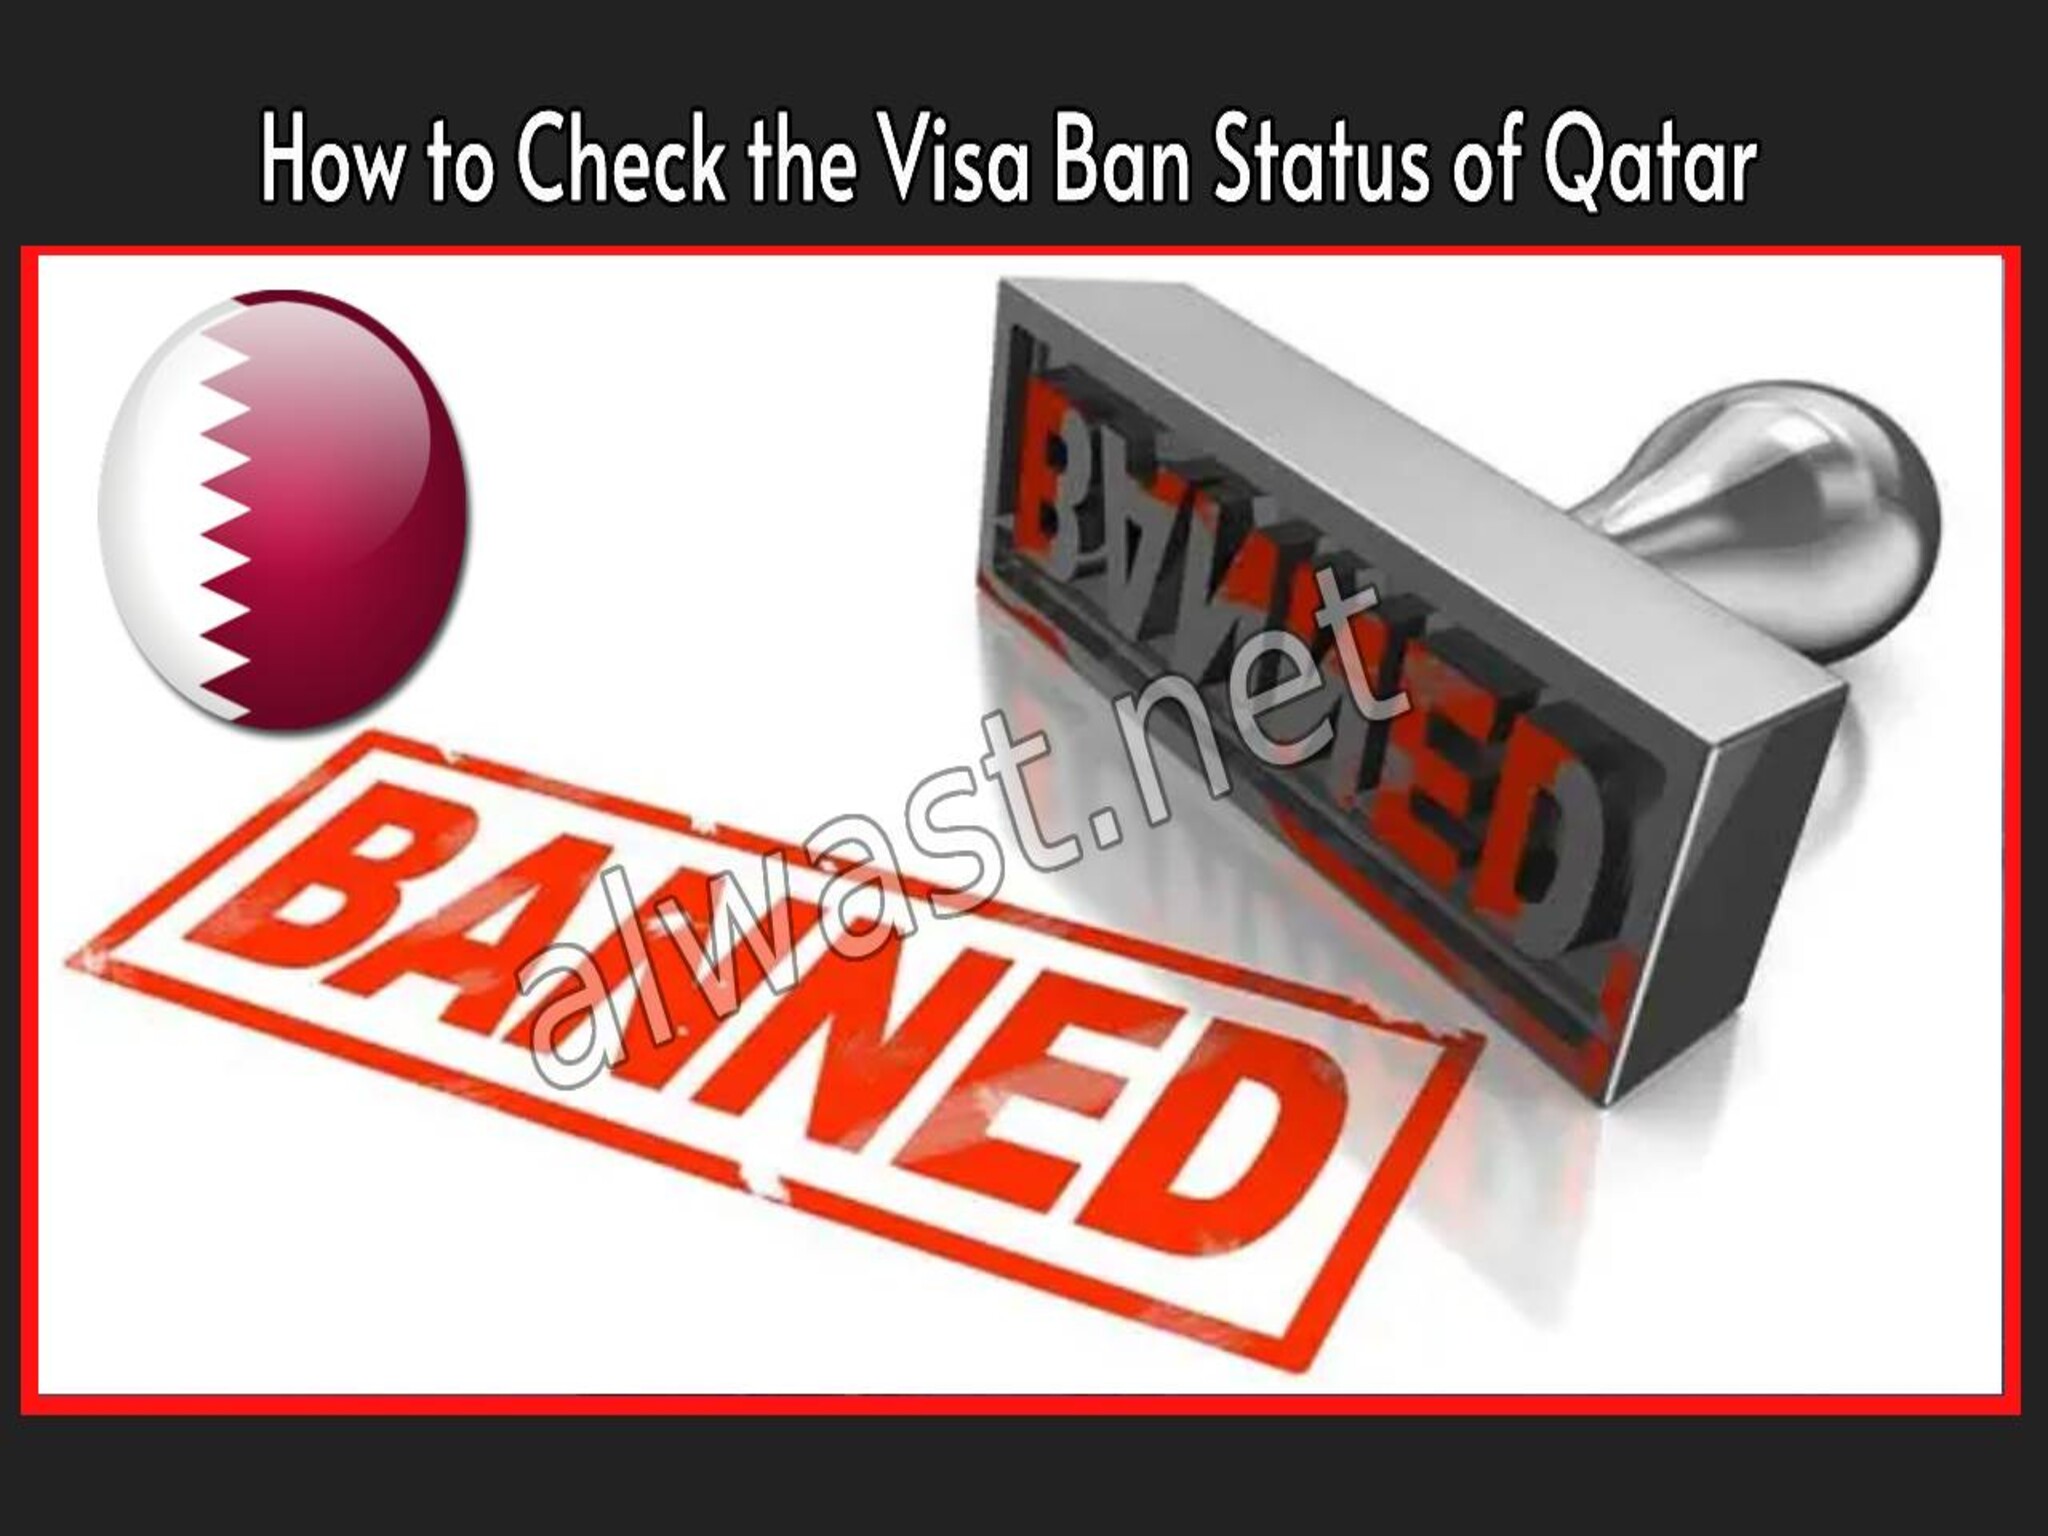 How to Check the Visa Ban Status of Qatar with a Passport Number